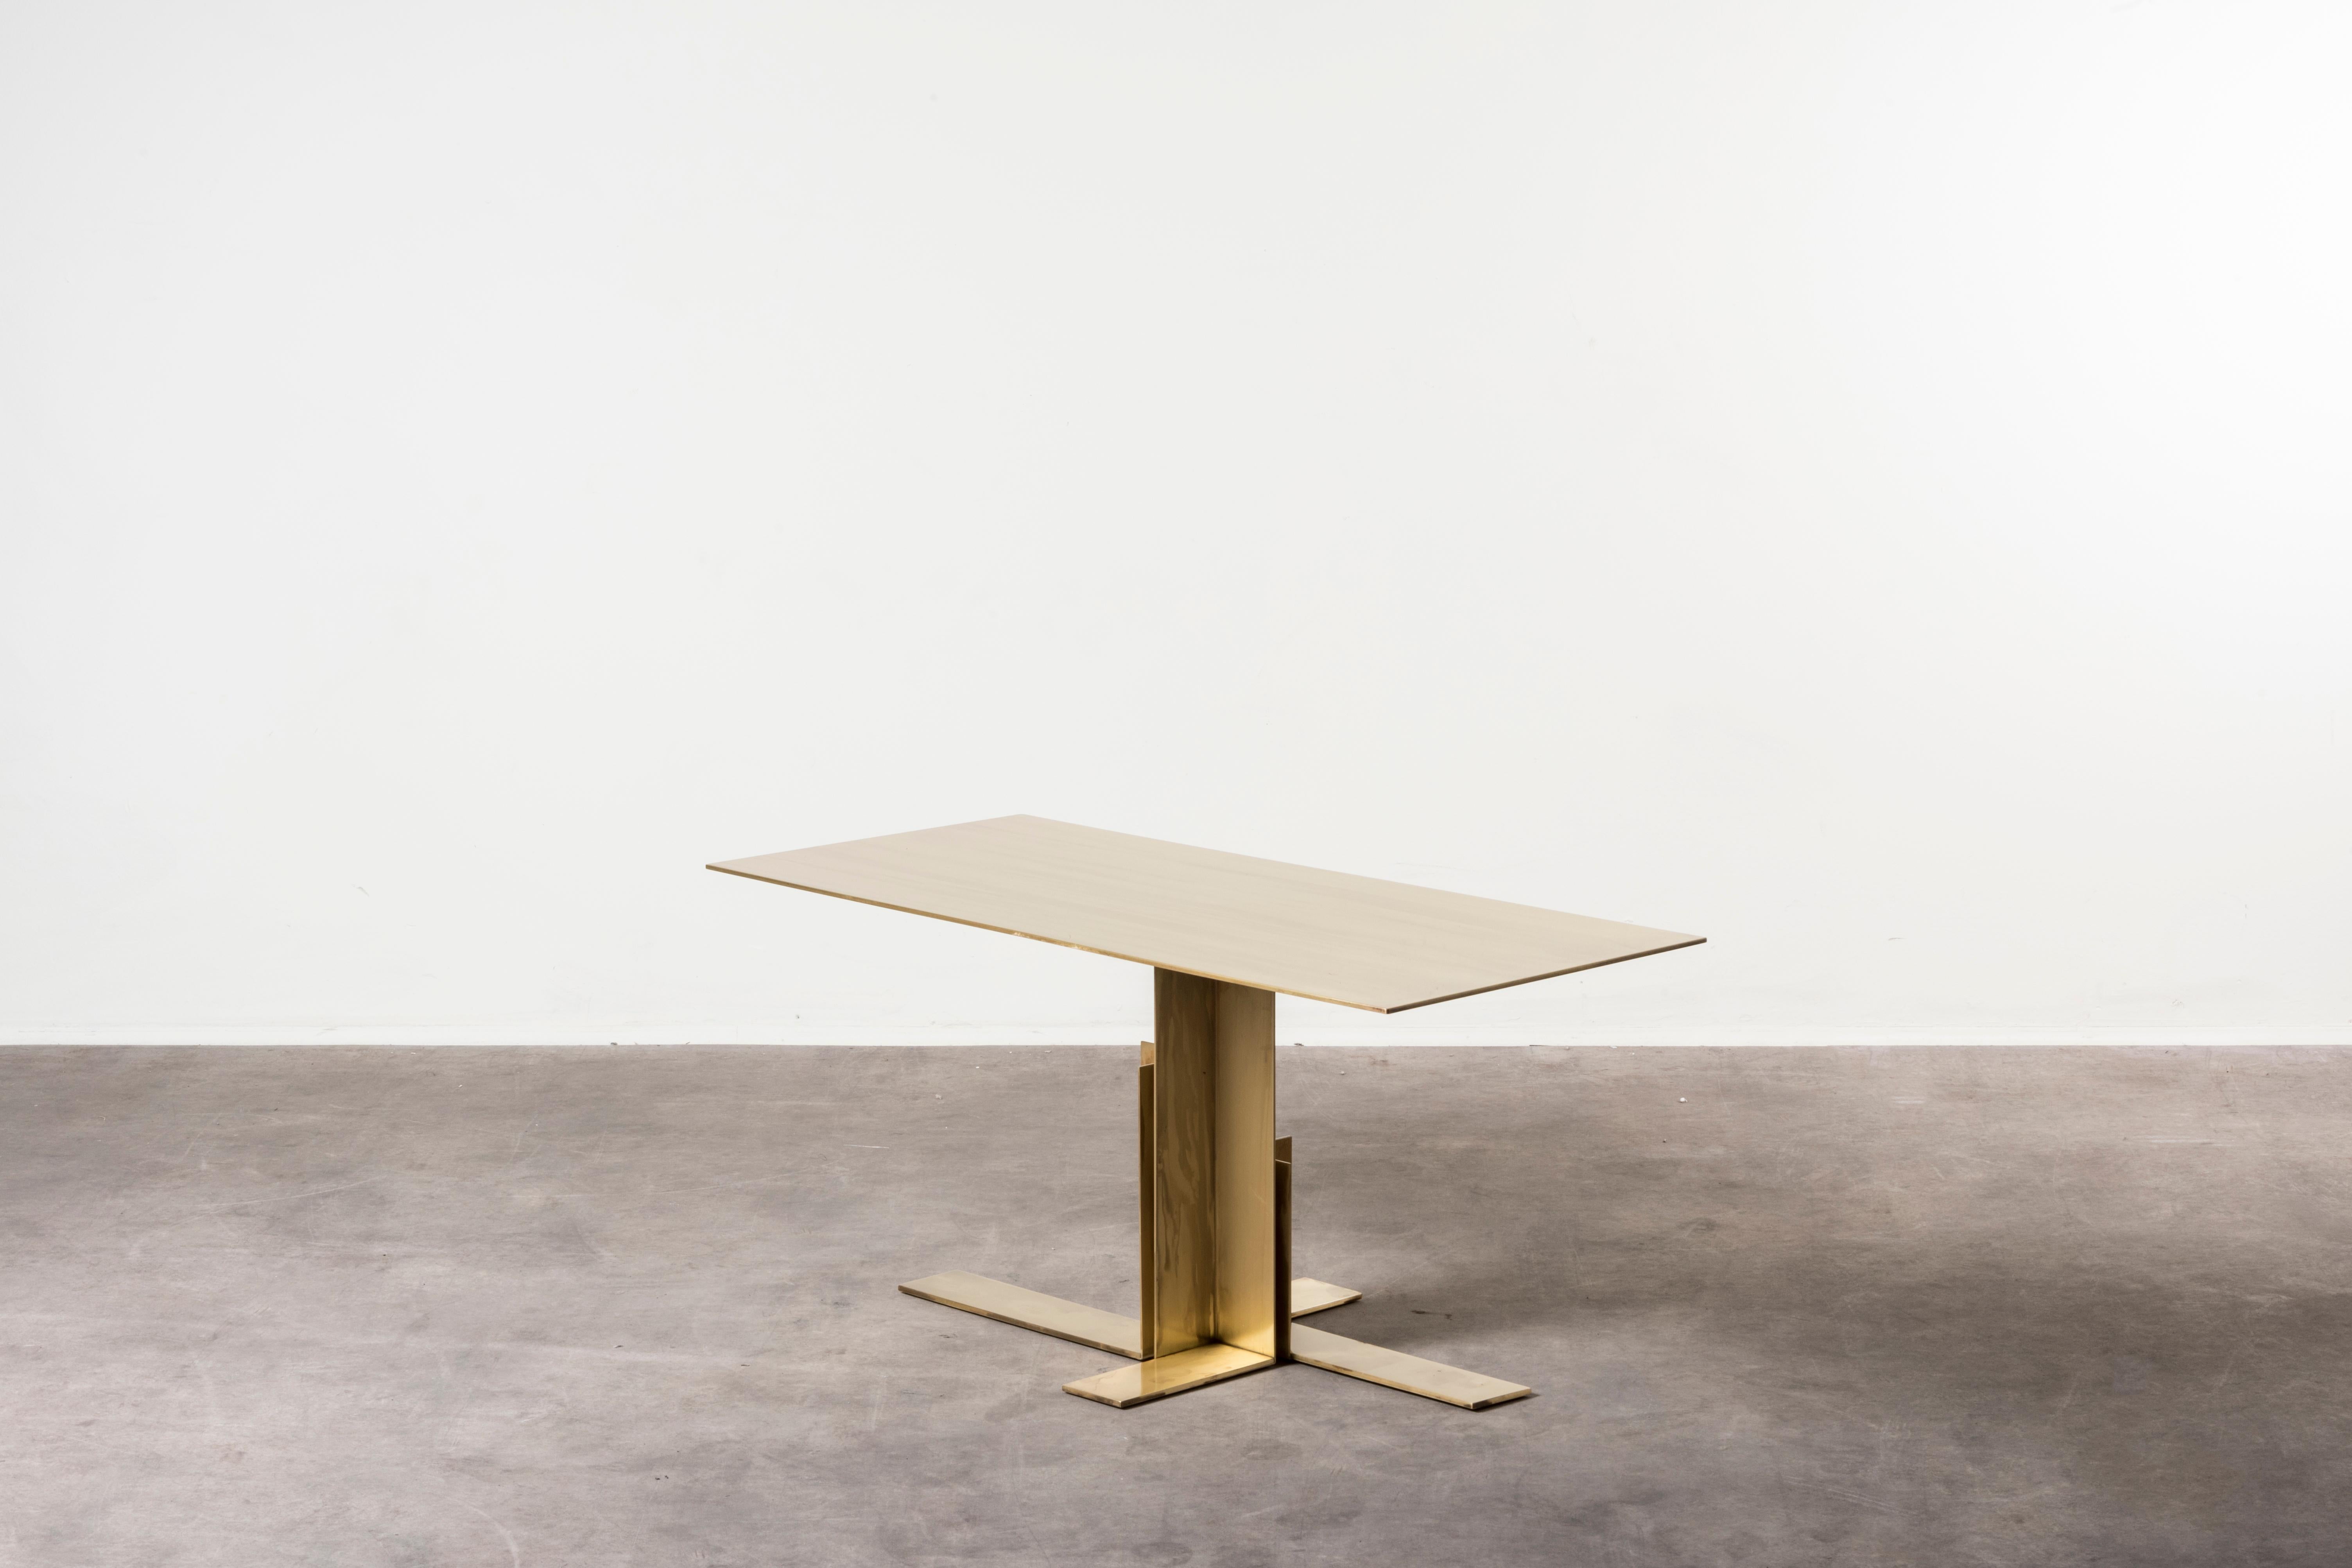 Low table by Nicolini Bertocco, Italy, 2019. Nilufar edition. Brass. Measures: 39 x 90 x h 40 cm, 15.3 x 35.4 x H 15.7 in. The collection is inspired by Mies Van Der Rohe’s famous cruciform column. Like the others pieces by Nicolini Bertocco,